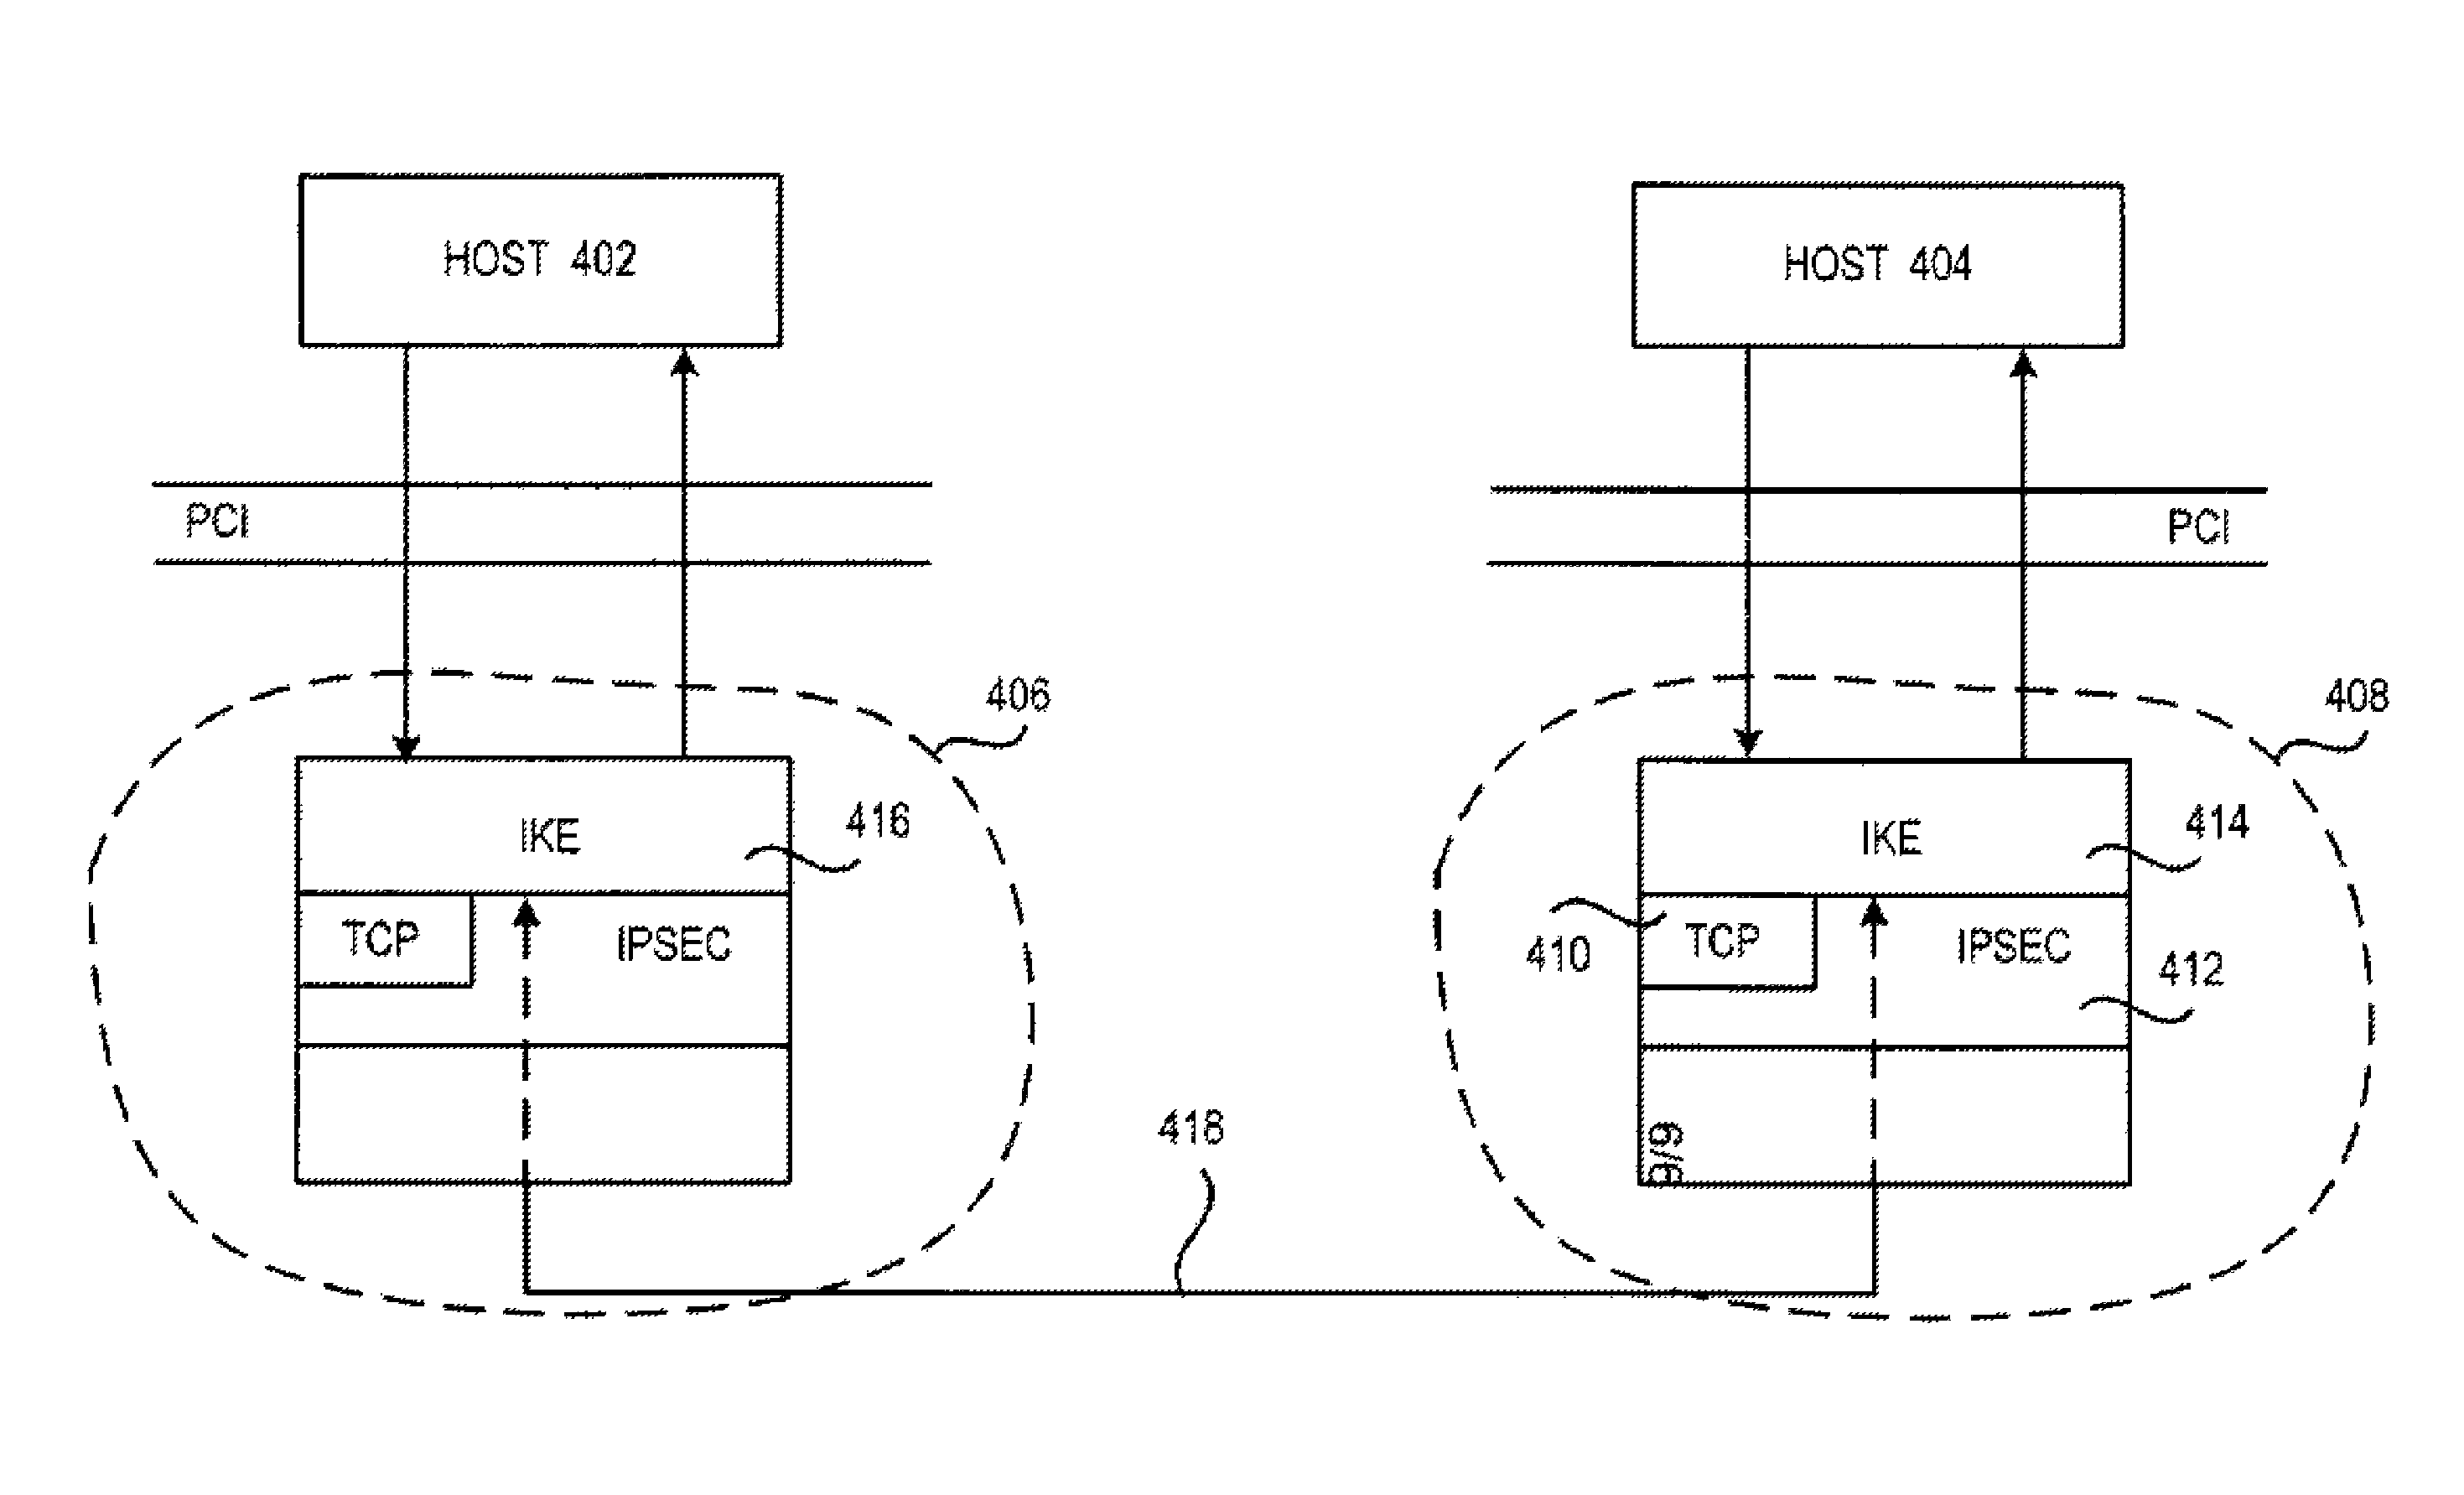 Systems and methods for implementing host-based security in a computer network